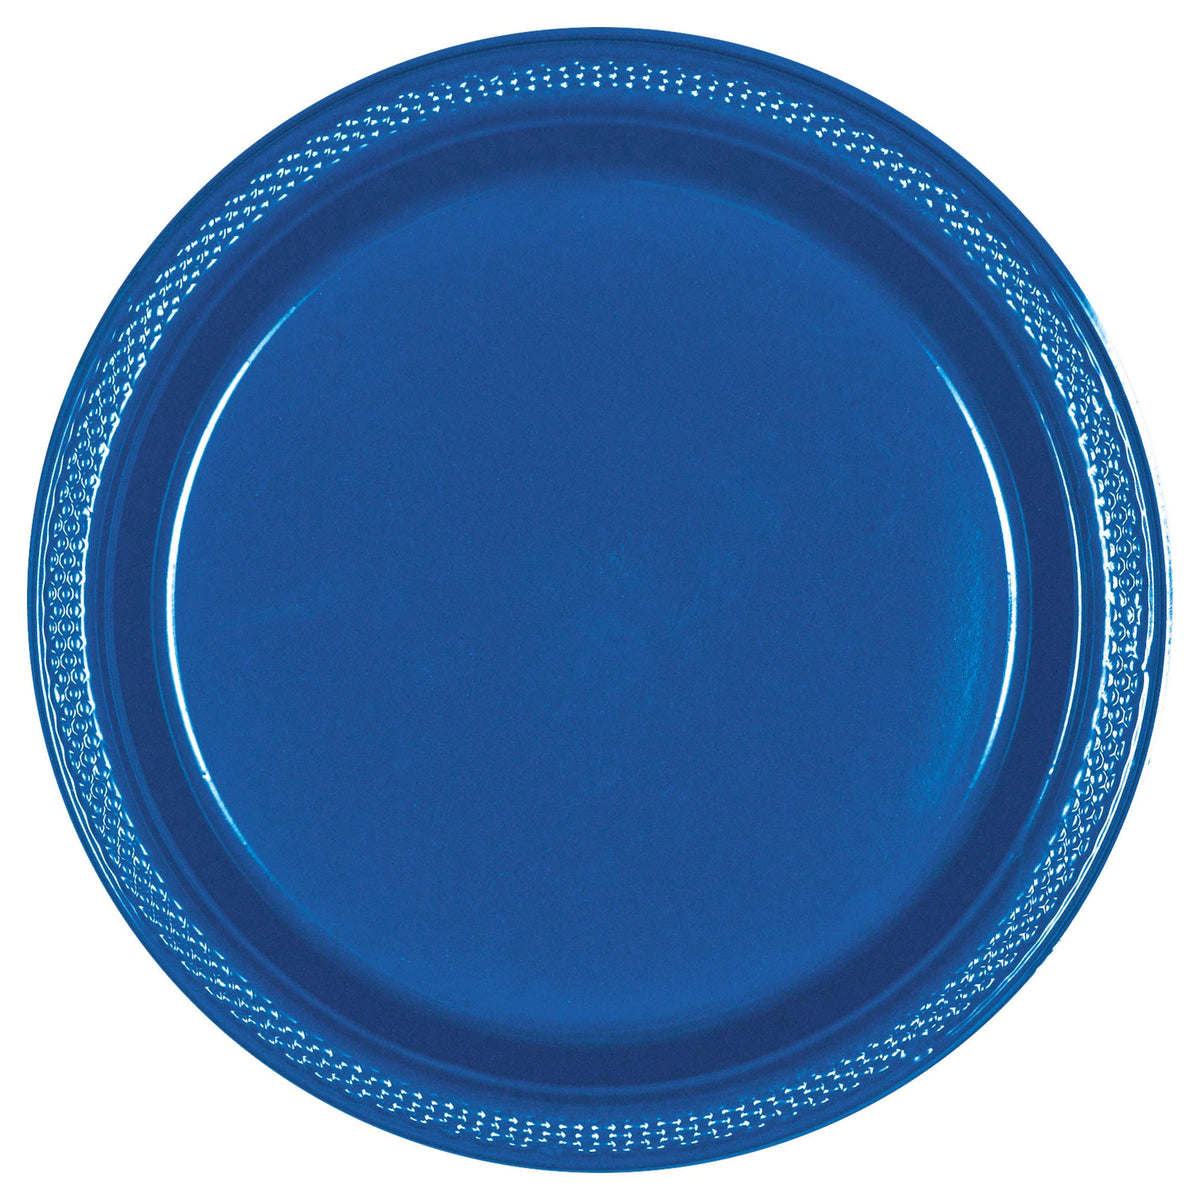 Bright Royal Blue 10" Round Plastic Plates, 20 count